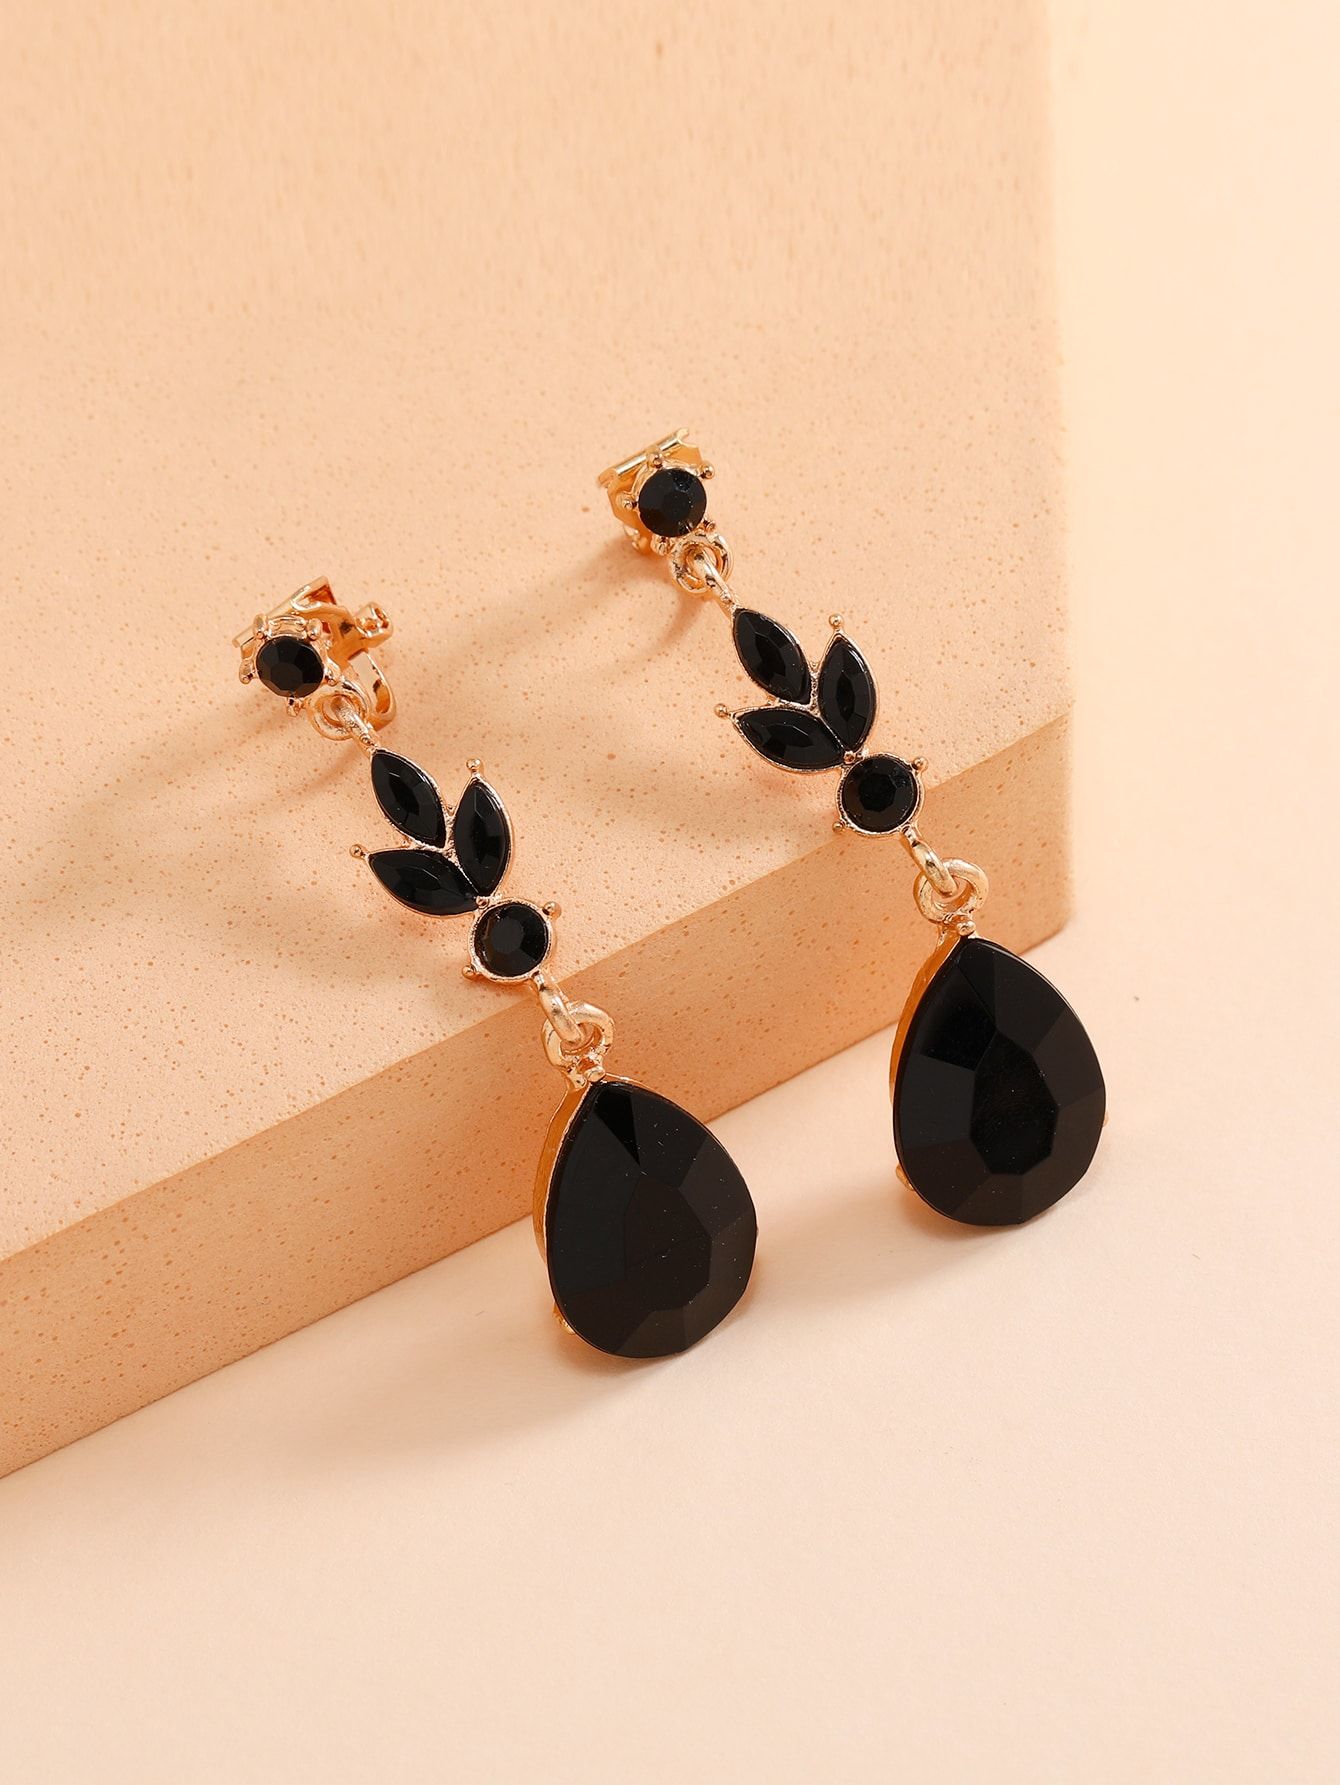 Add Black earrings to your fashion jewelry